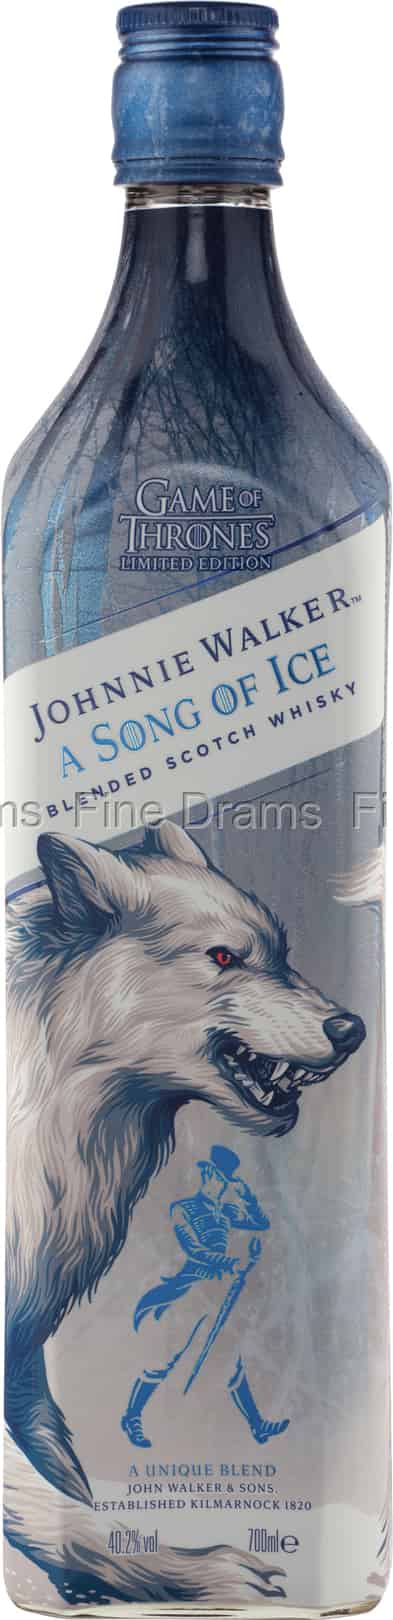 Th laden Opblazen Johnnie Walker a Song of Ice - Game of Thrones Whisky